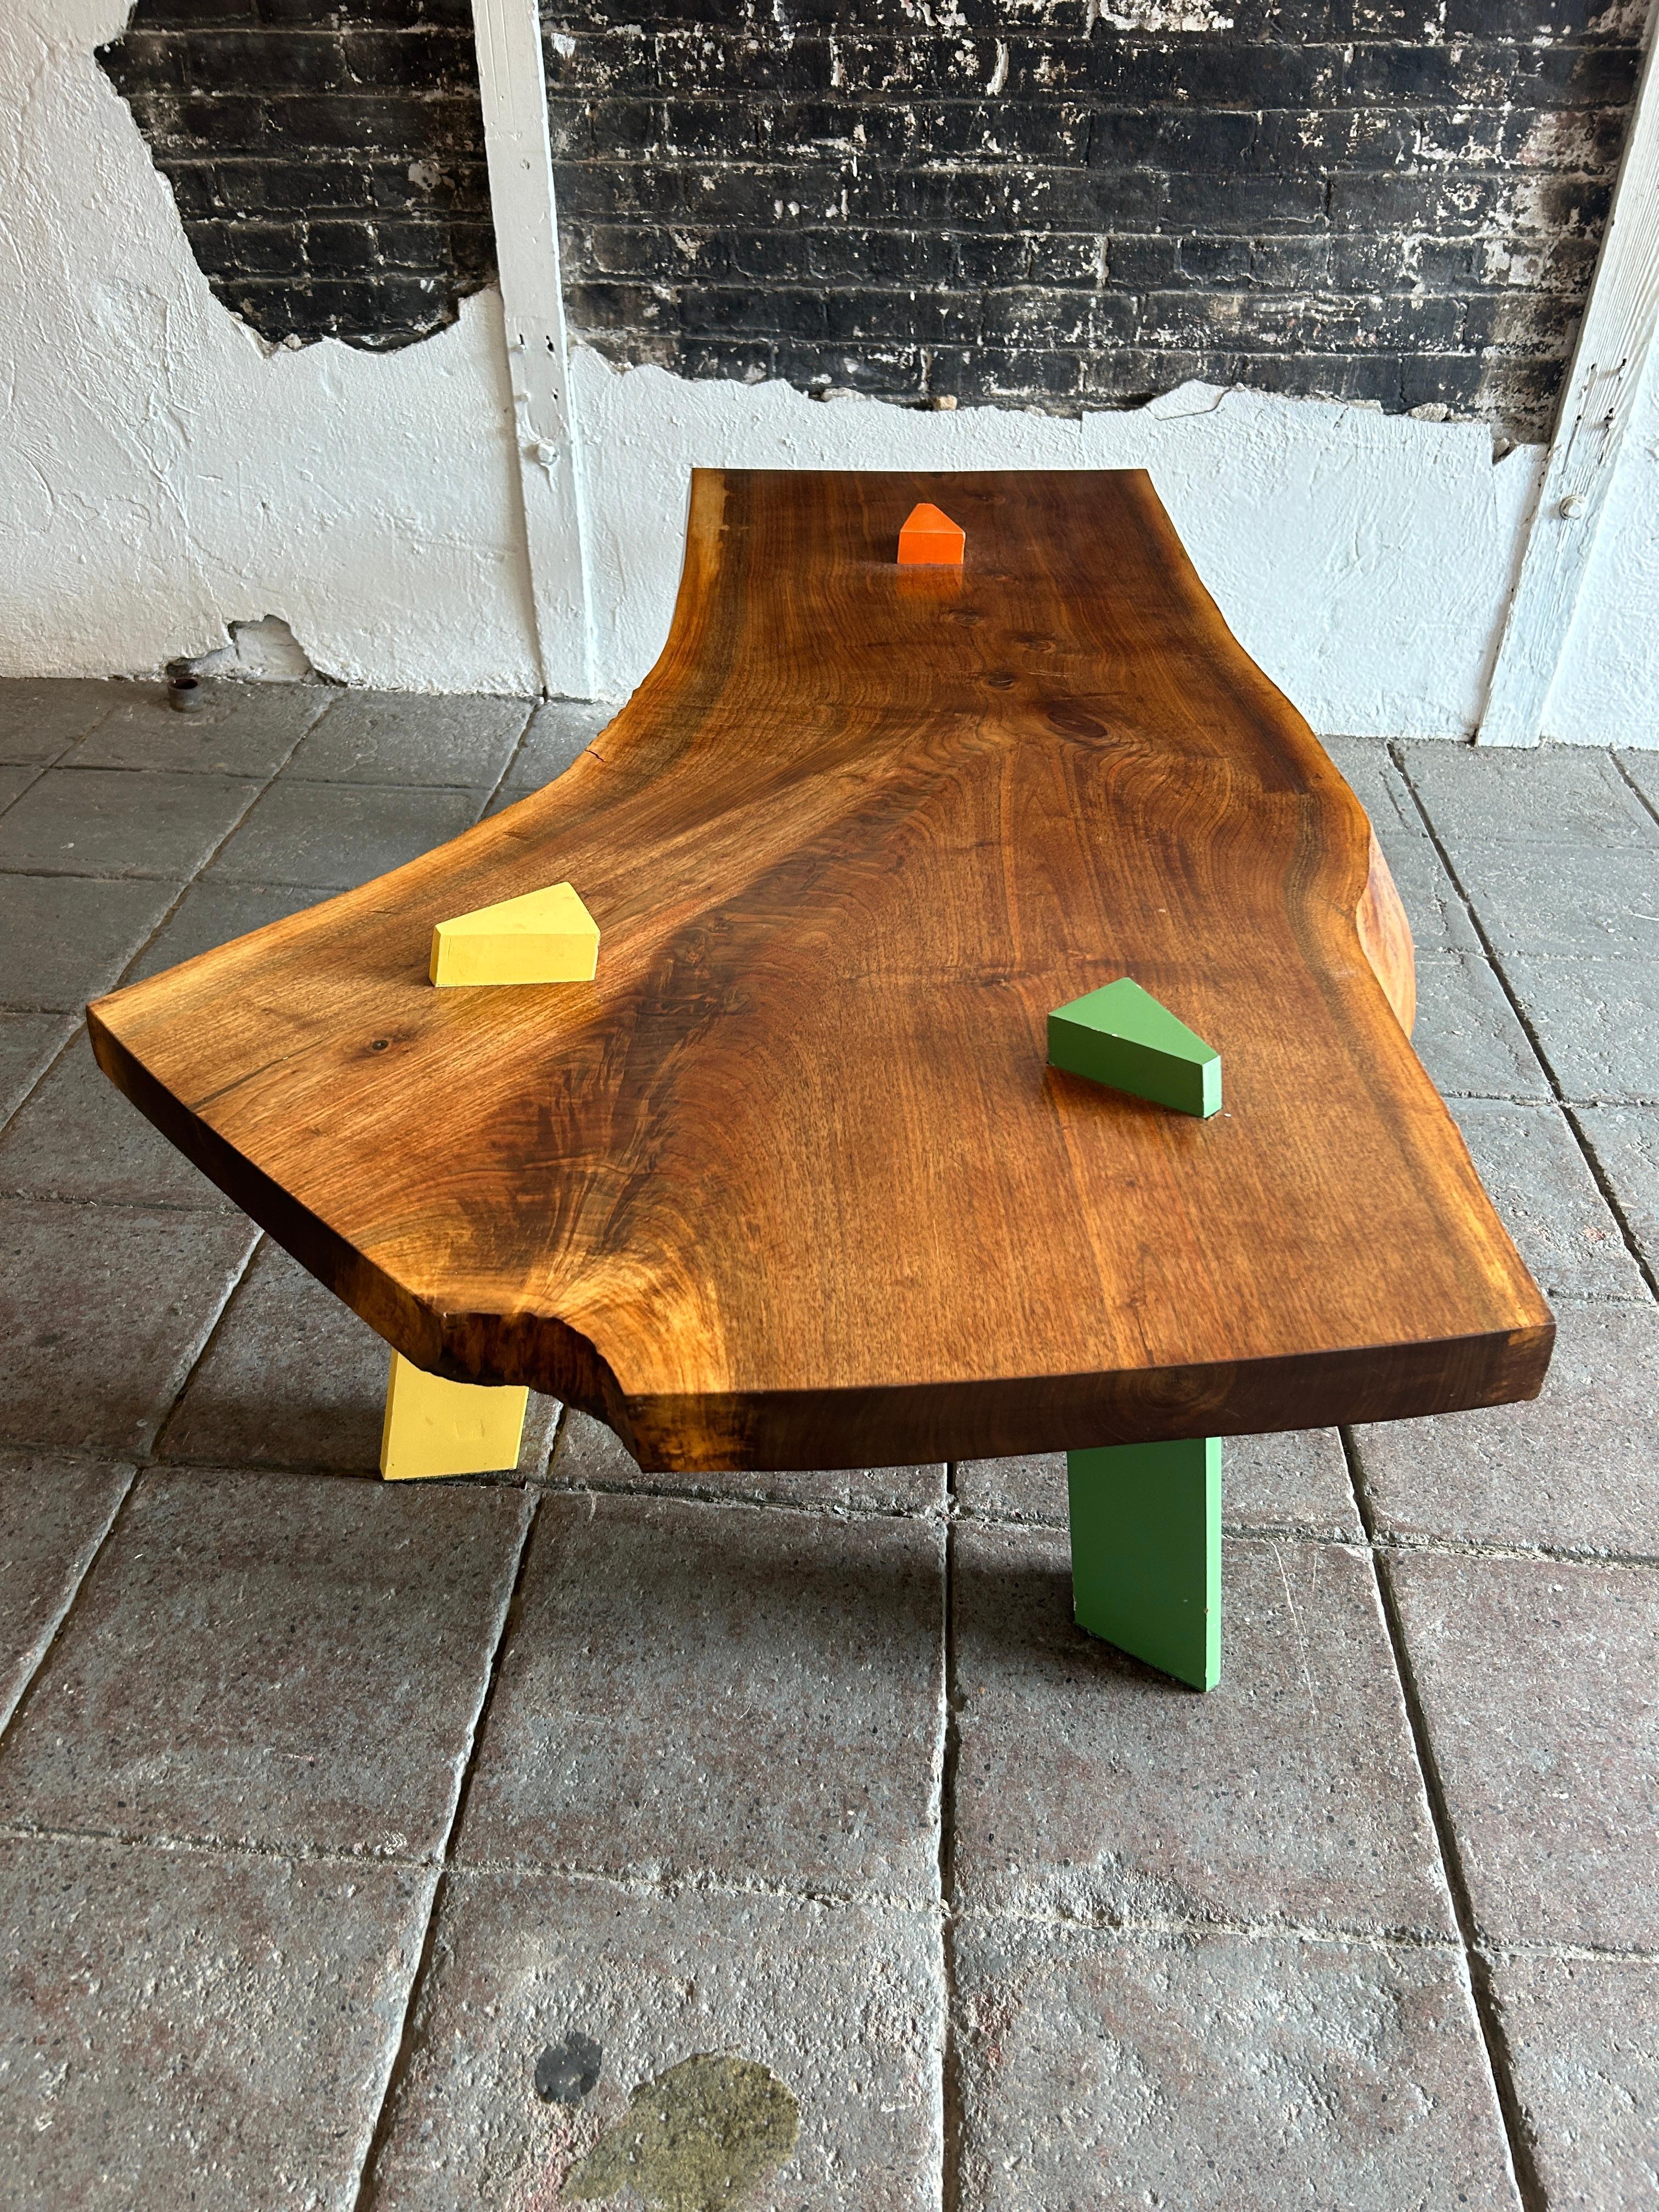 Late 20th Century Post Modern Walnut Slab coffee table with colored triangle legs studio craft  For Sale